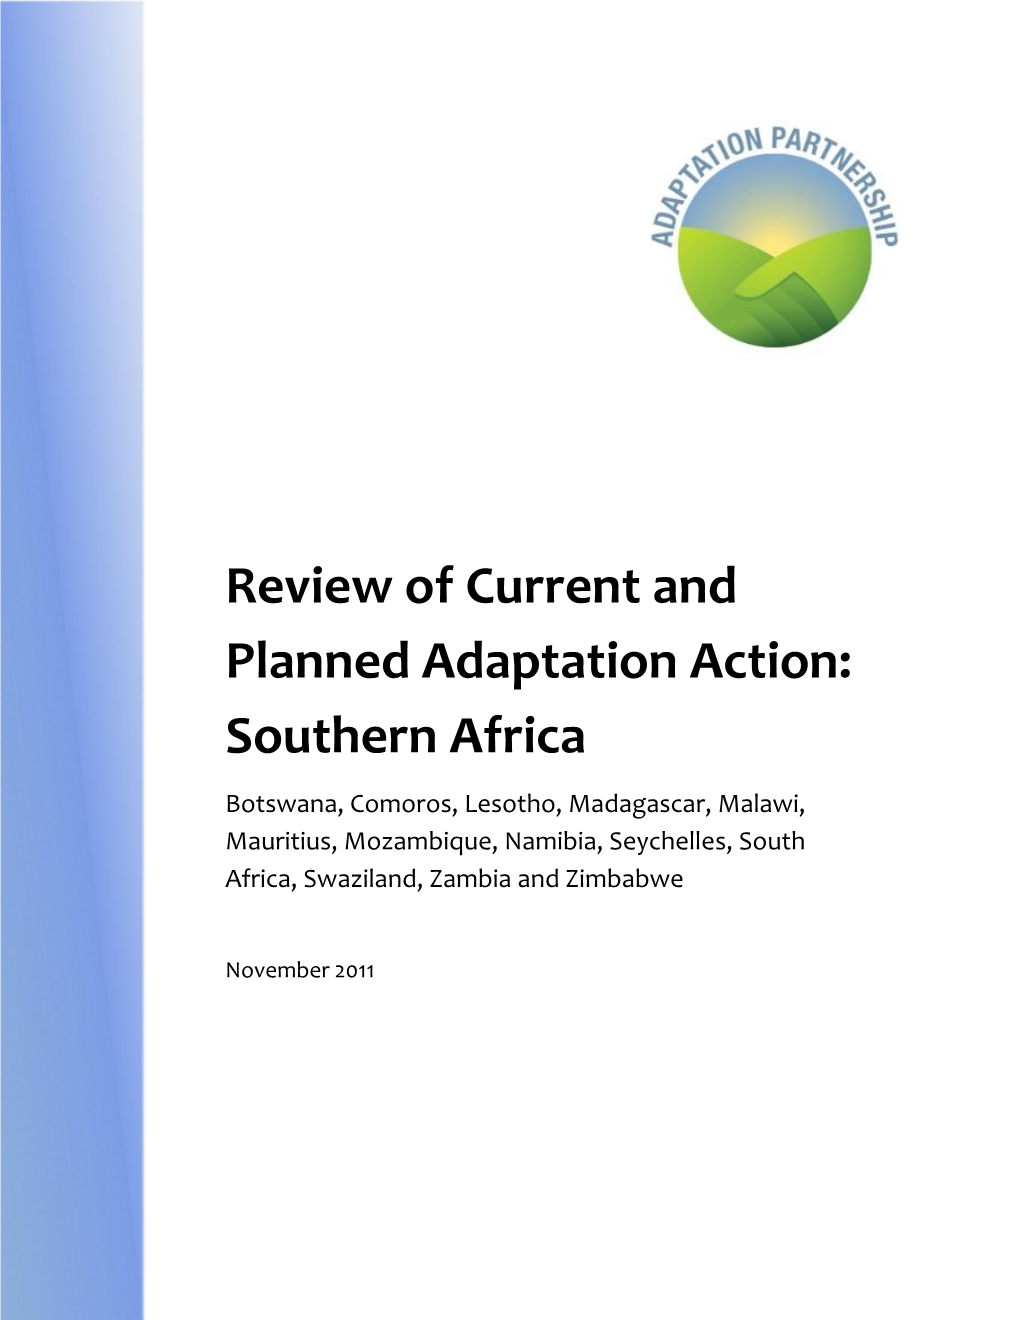 Review of Current and Planned Adaptation Action: Southern Africa